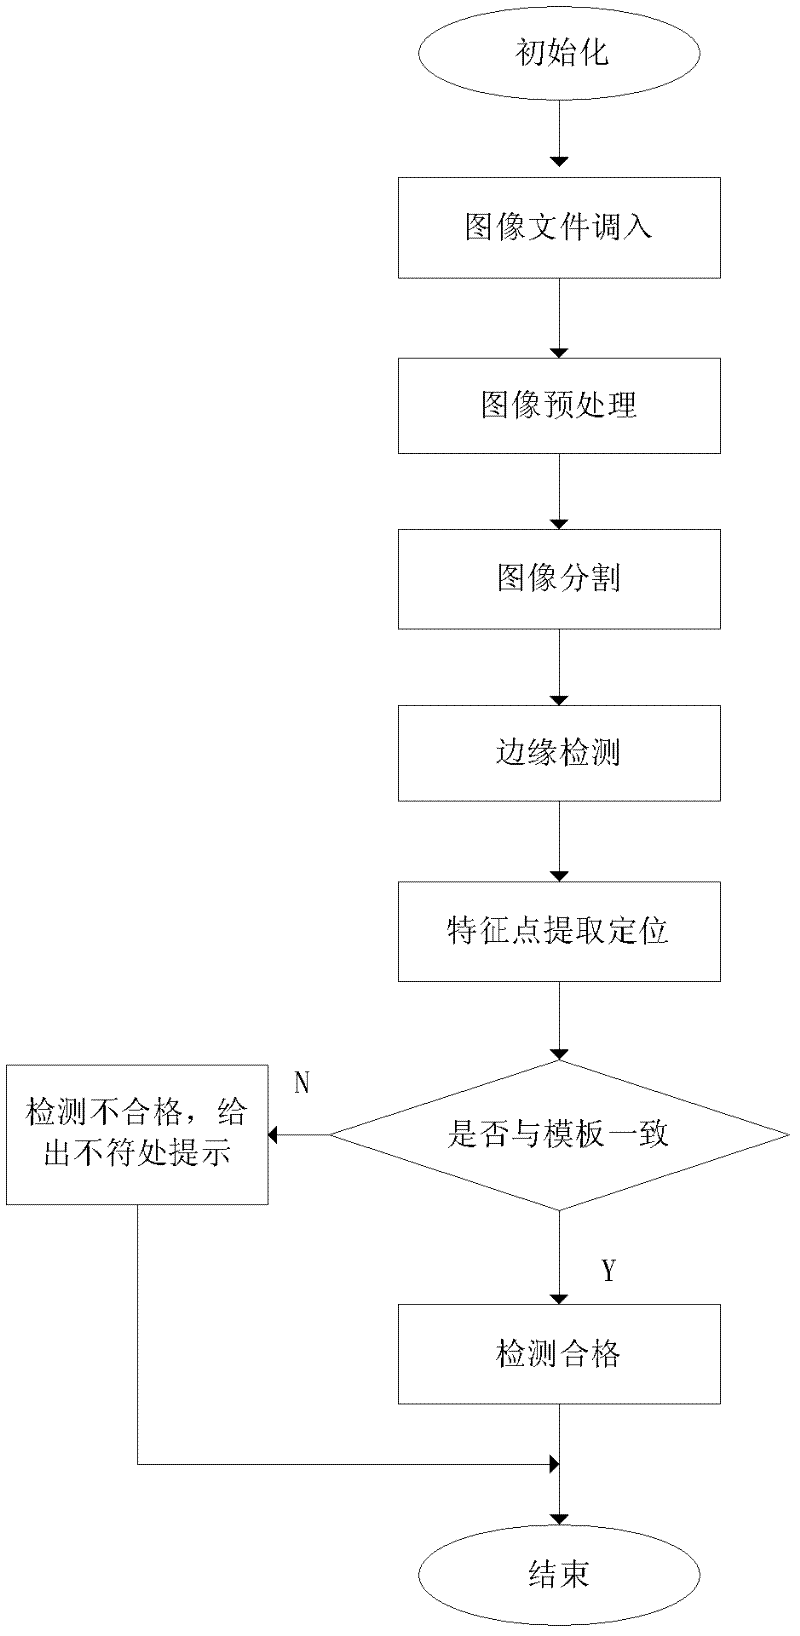 Inspection method for inspecting welding correctness of the device of device on circuit board in batch